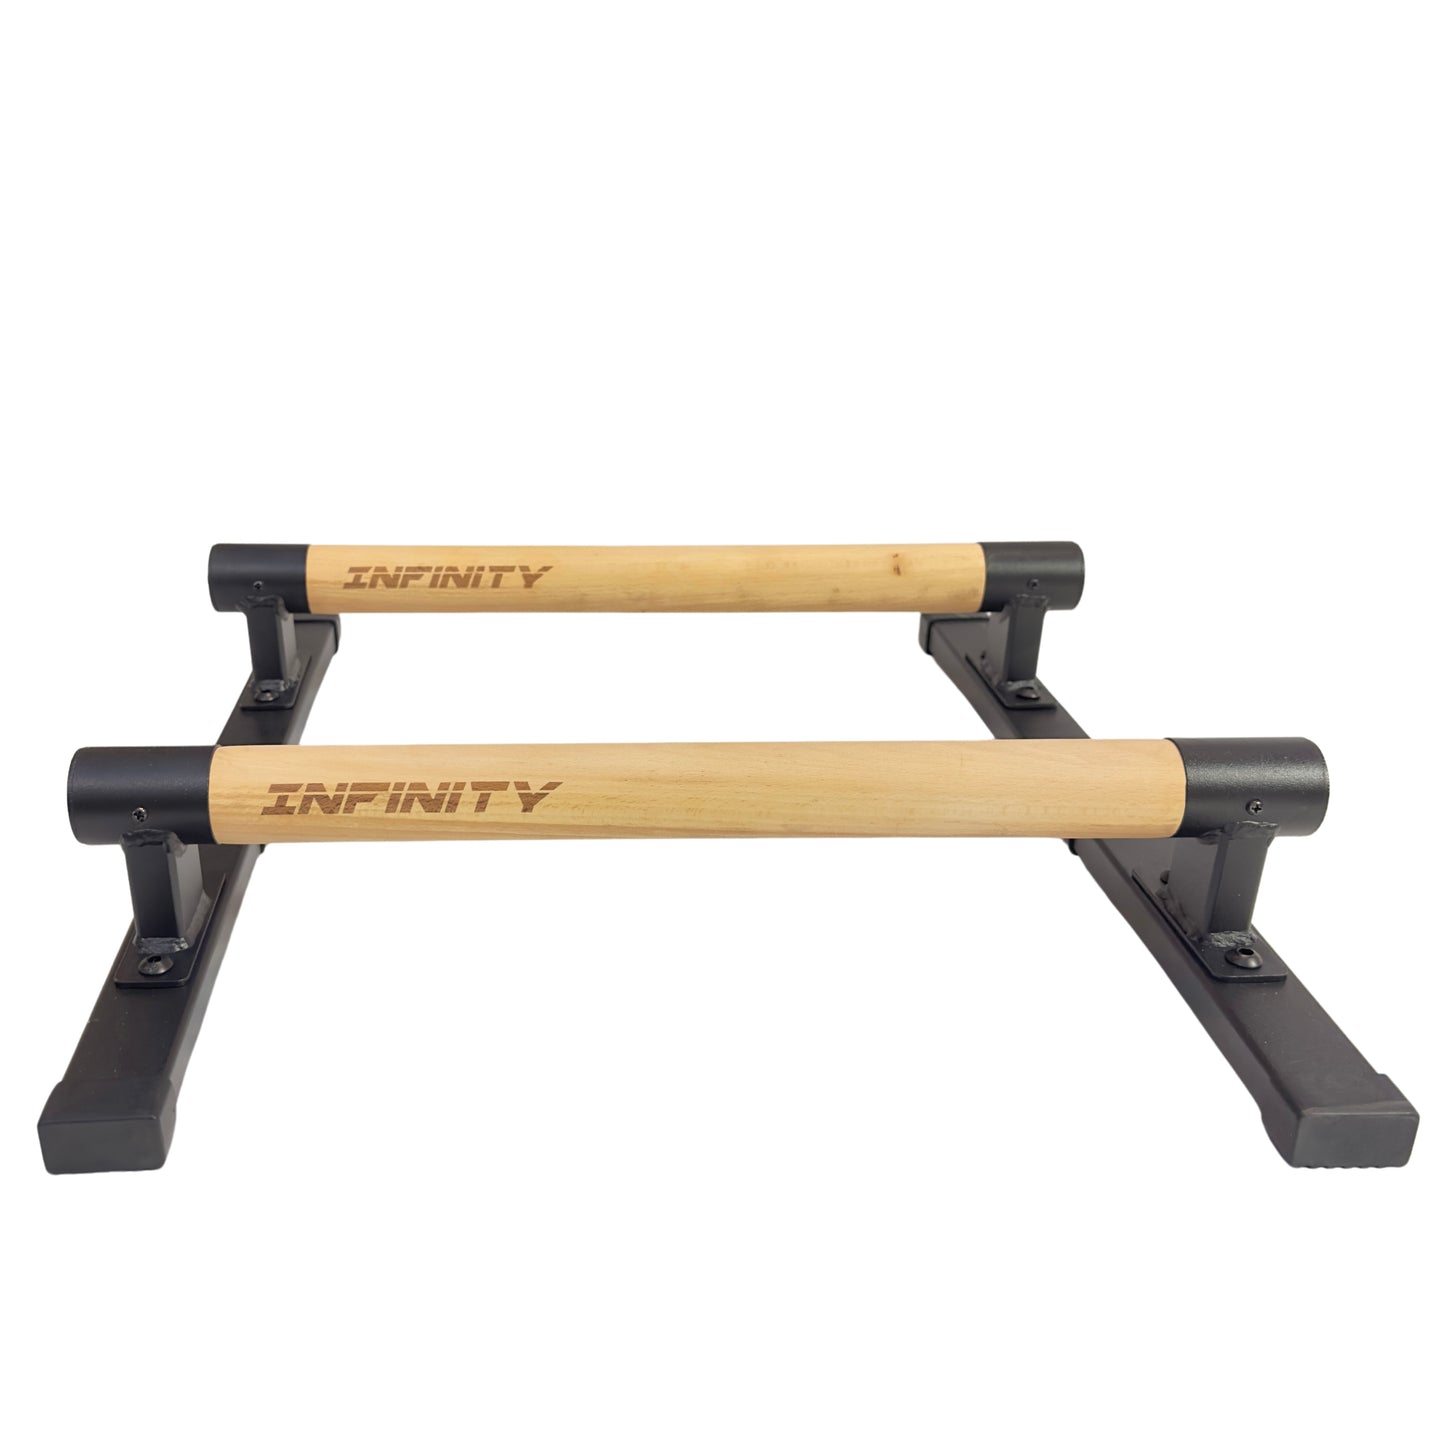 Long Parallettes with Wooden Handles For Callisthenics gymnastics Crossfit handstand planche